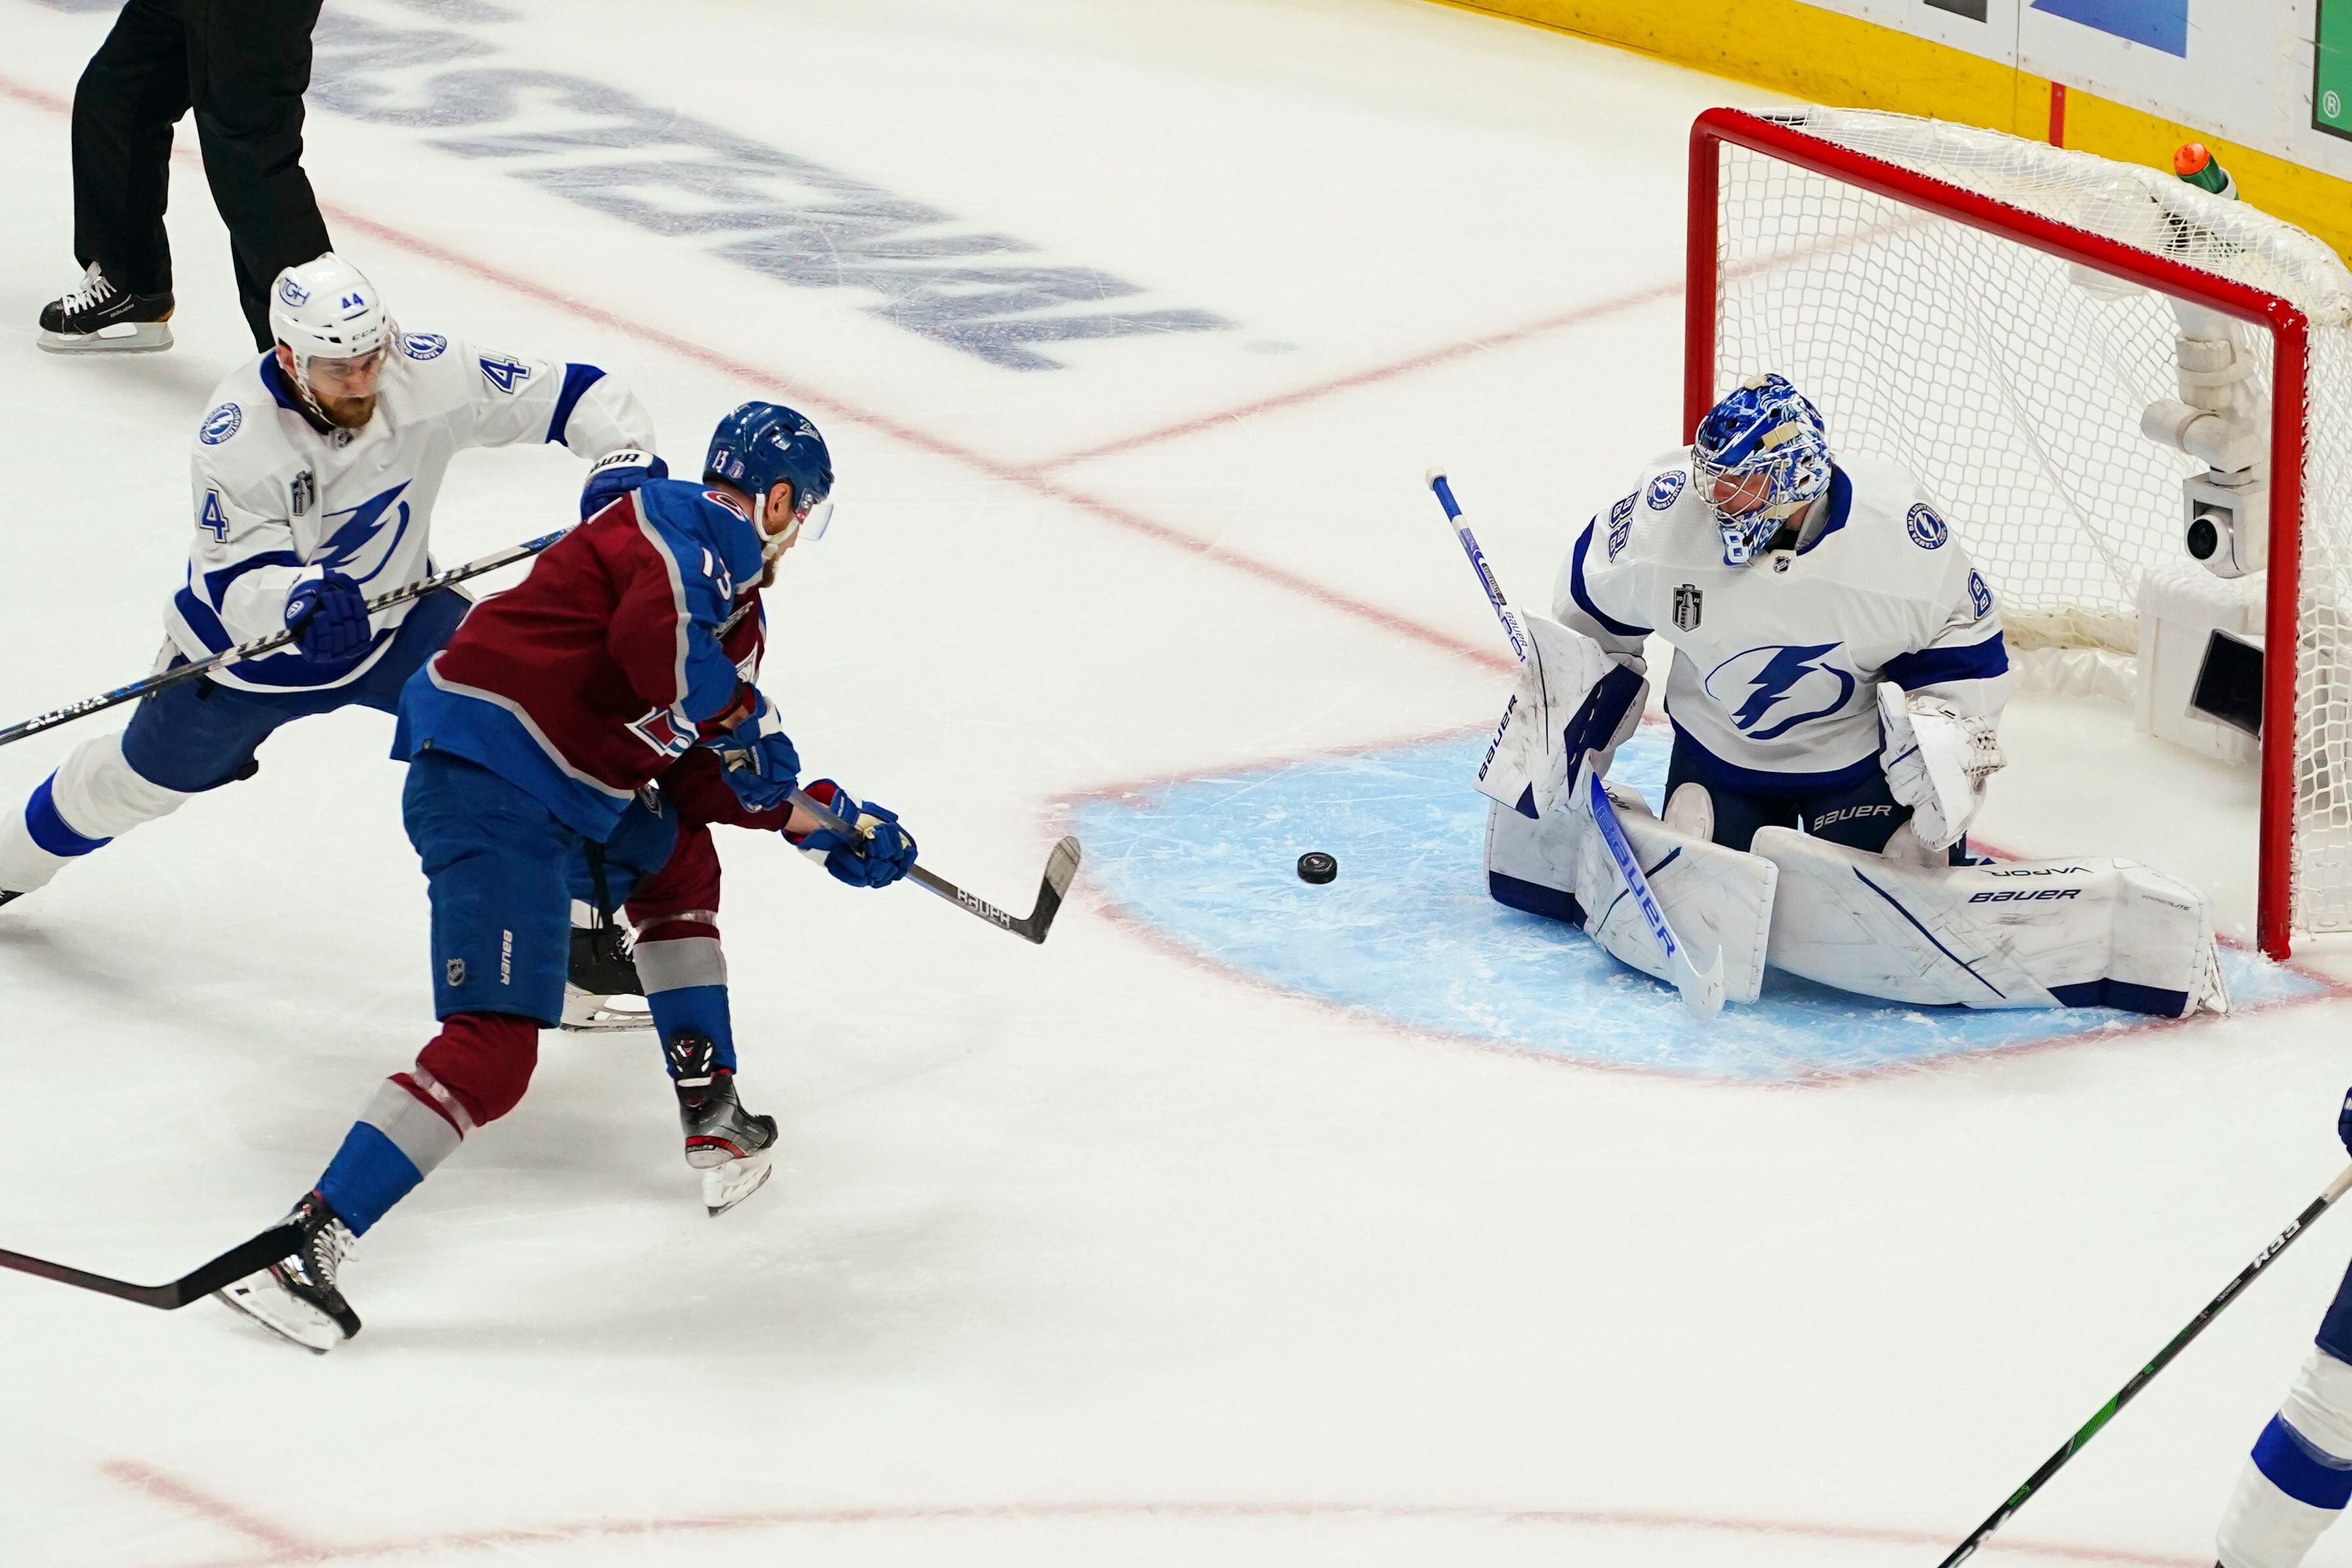 Out to dry': NHL champion Lightning in 2-0 hole to Avs - Seattle